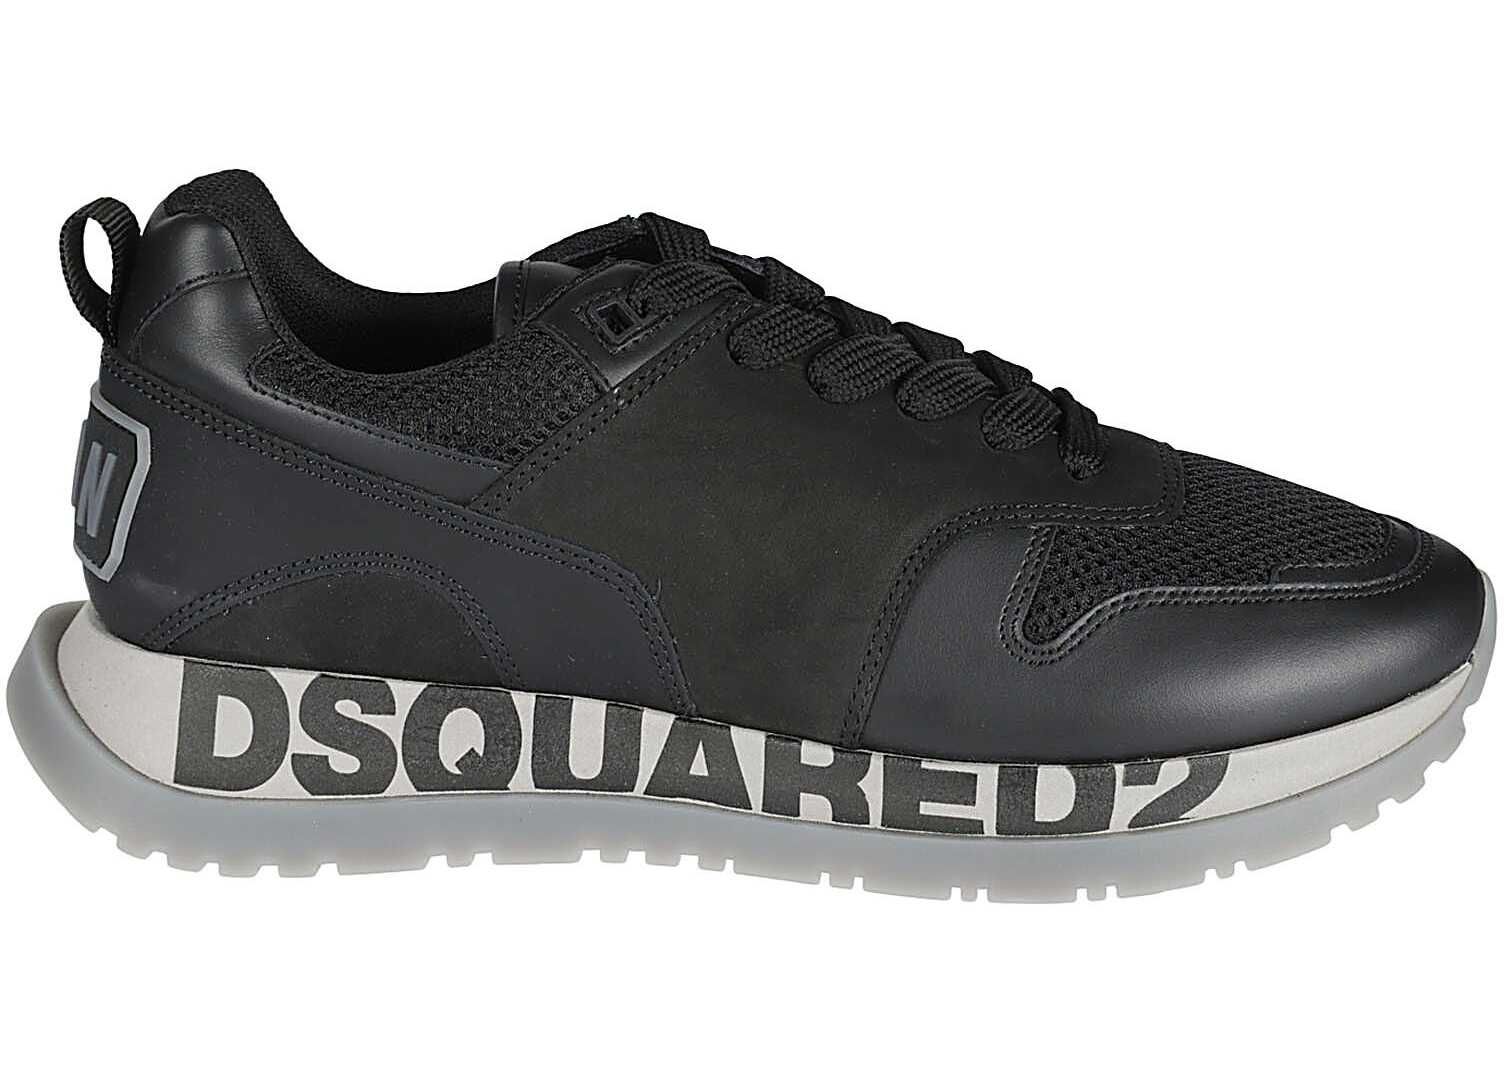 DSQUARED2 Other Materials Sneakers BLACK image6